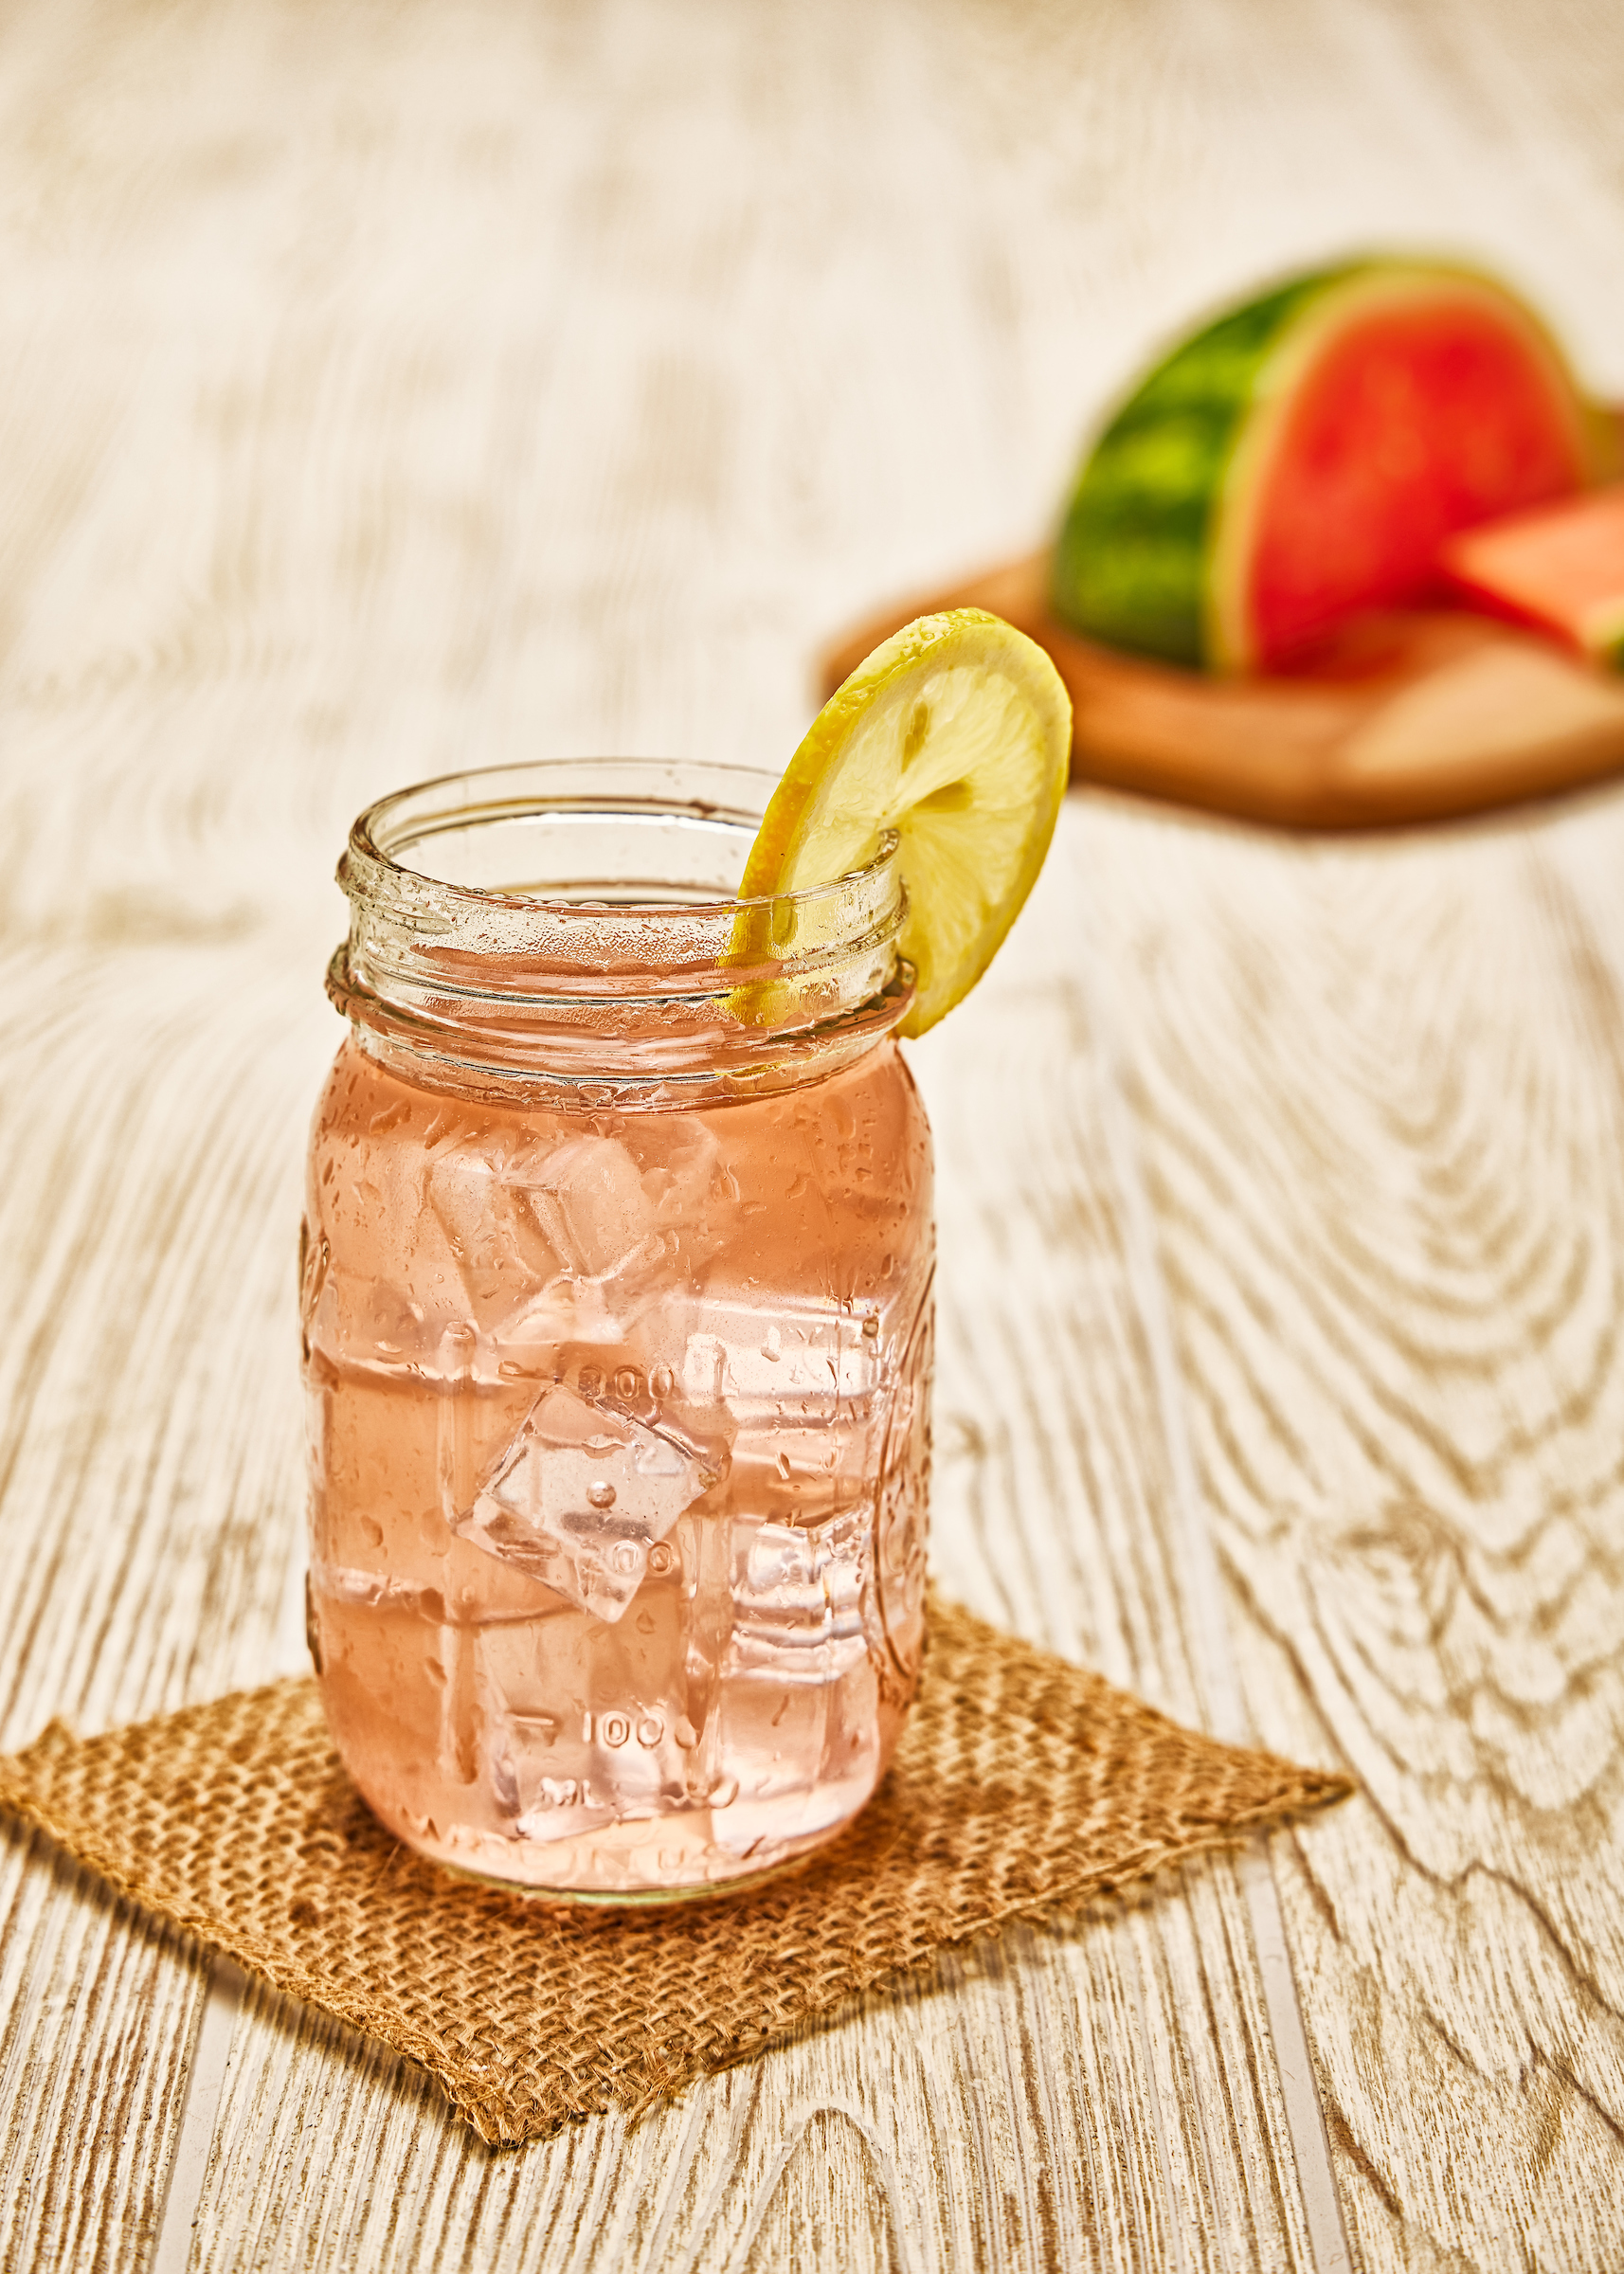 A little something fun to drink your Watermelon Moonshine from